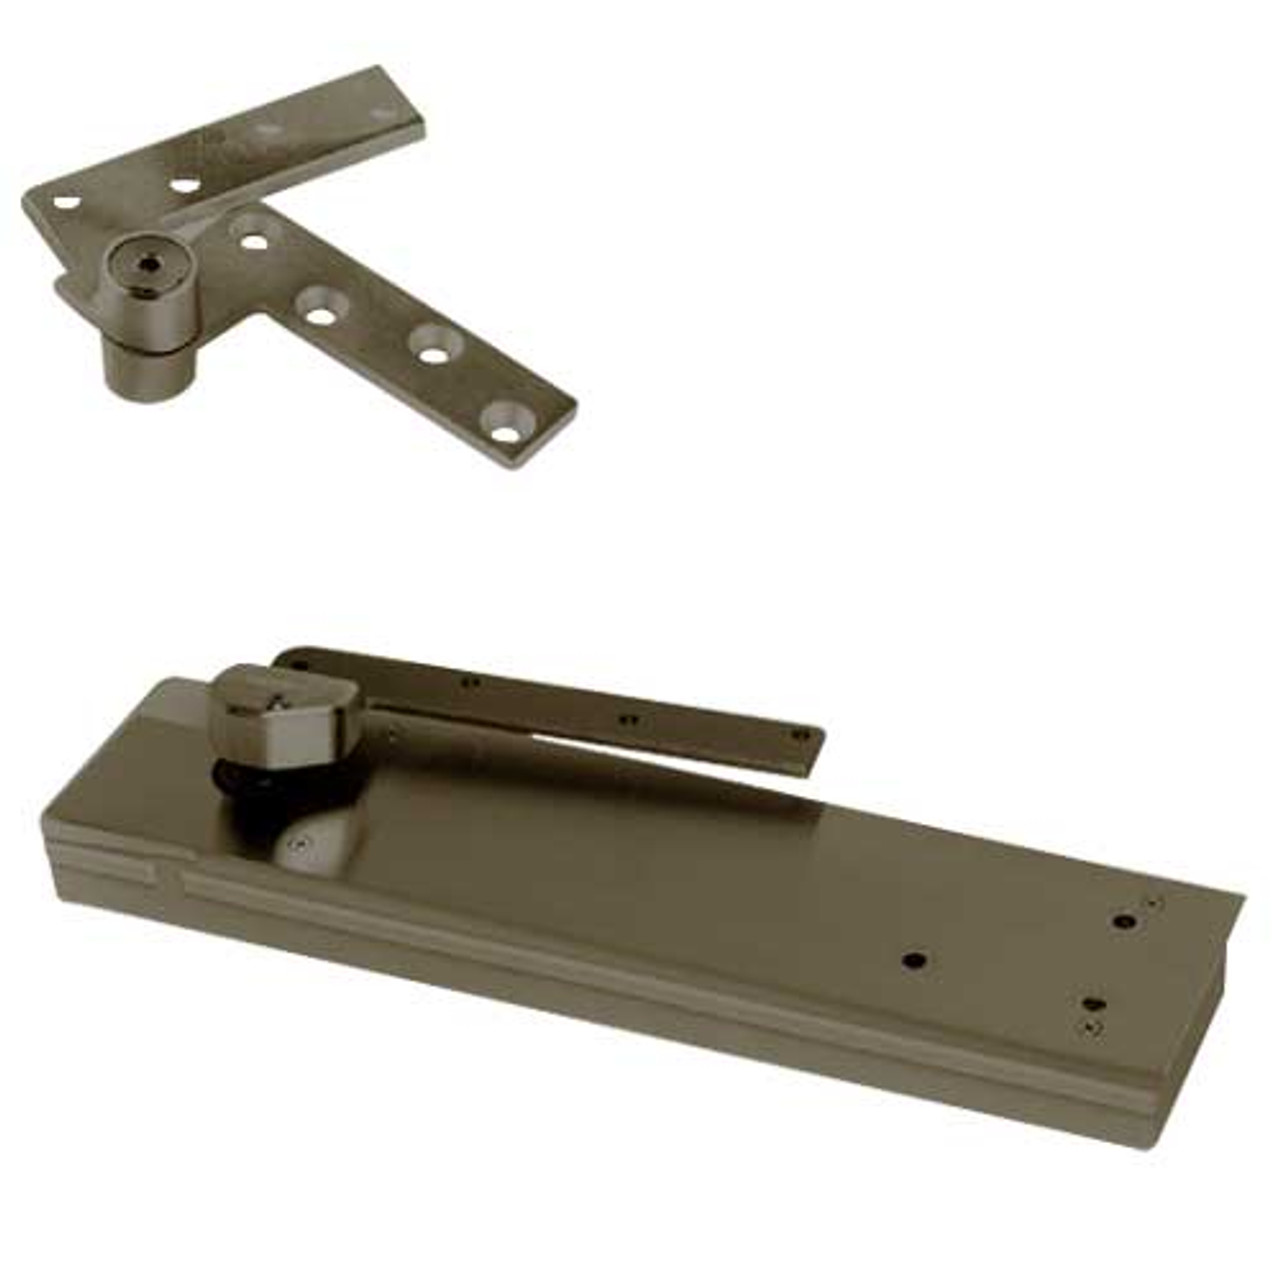 5103ABC105-1-1/2OS-SC-LH-613 Rixson 51 Series 1-1/2" Offset Hung Shallow Depth Floor Closers in Dark Bronze Finish